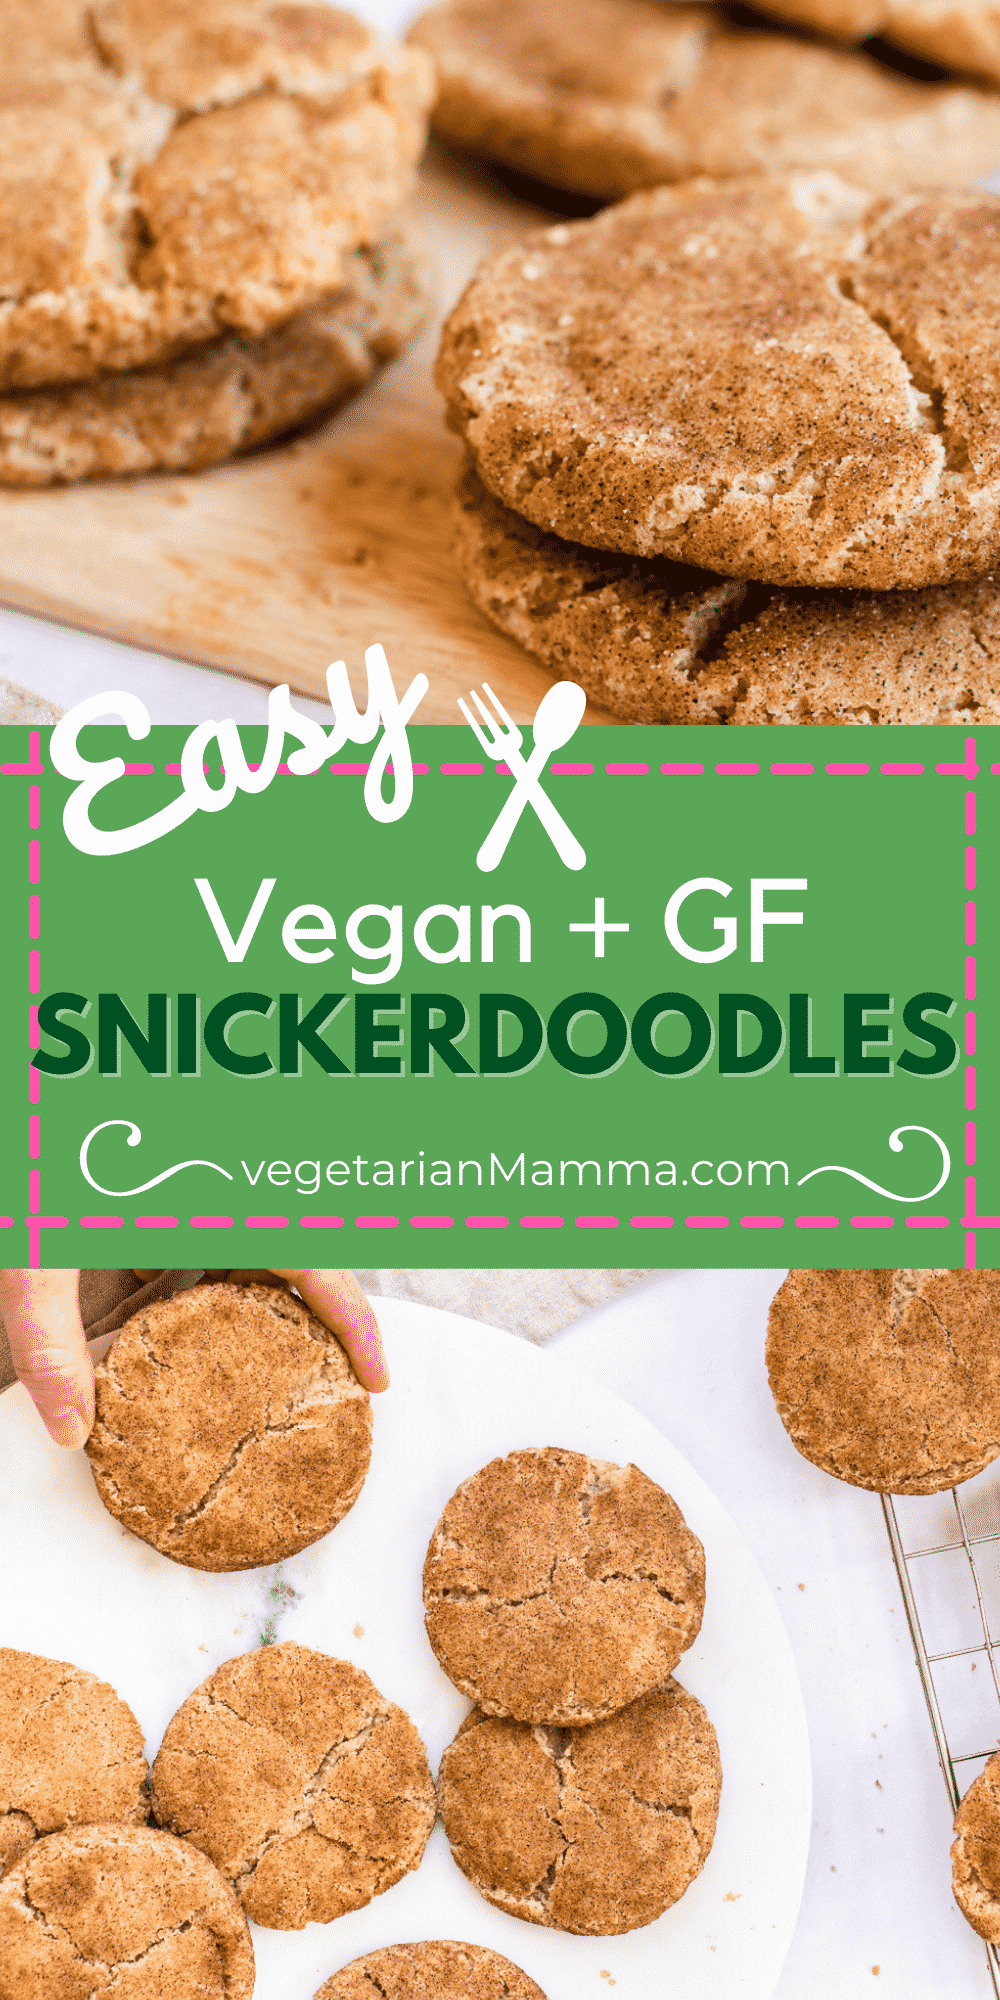 Vegan Snickerdoodle Cookies are so chewy and soft, you'll never believe they're gluten-free! Rolled in homemade cinnamon sugar, they're the perfect simple cookie recipe. #veganbaking #glutenfreecookies